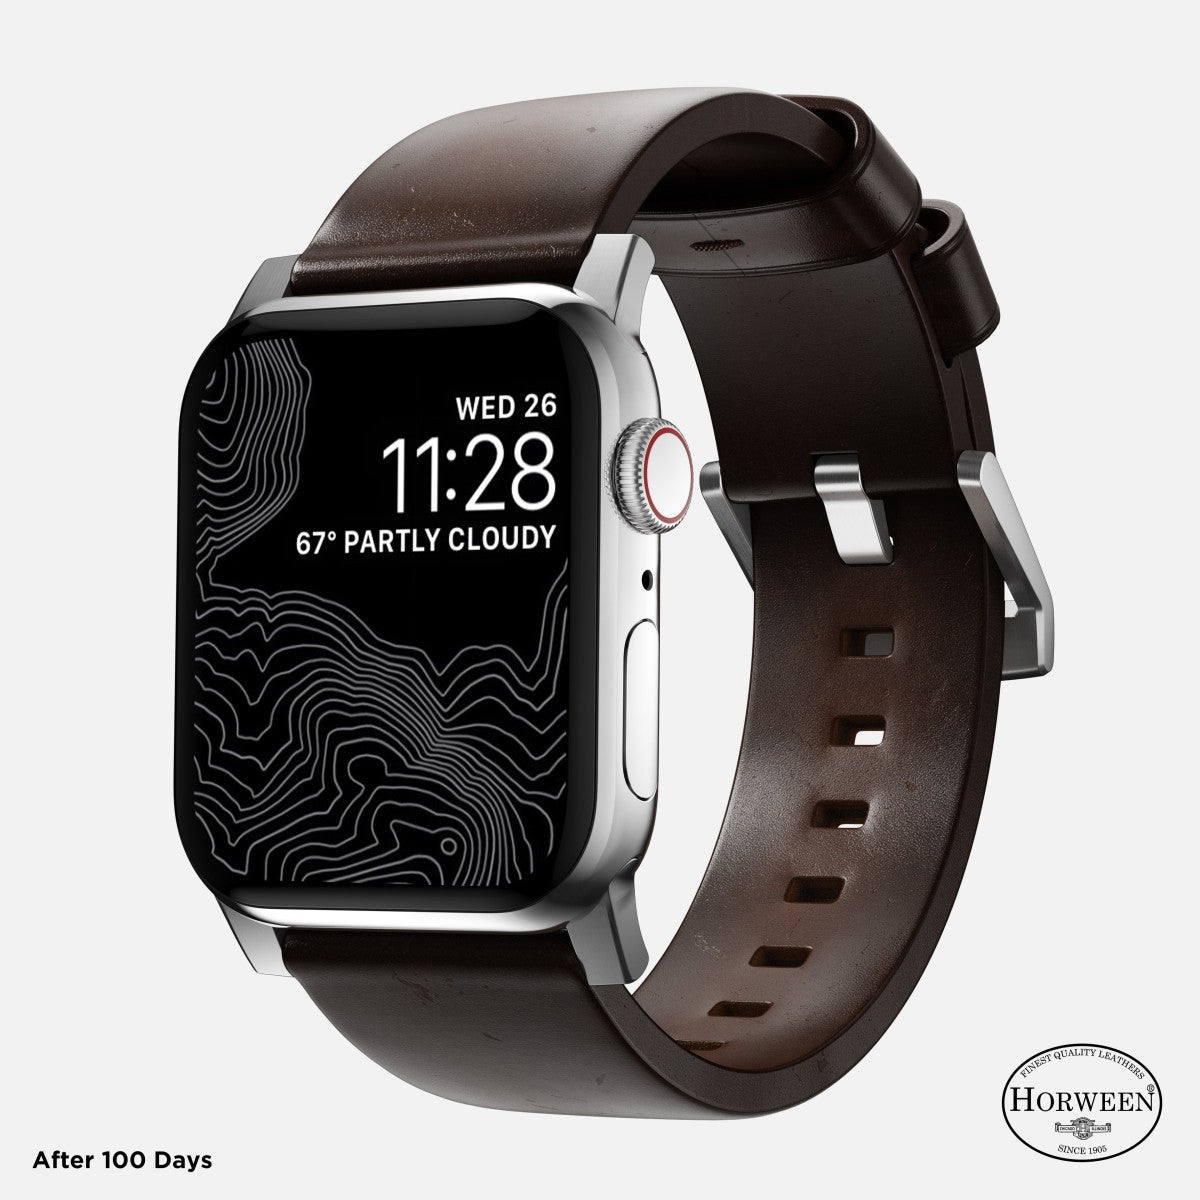 Nomad Modern Leather Apple Watch Band - Storming Gravity